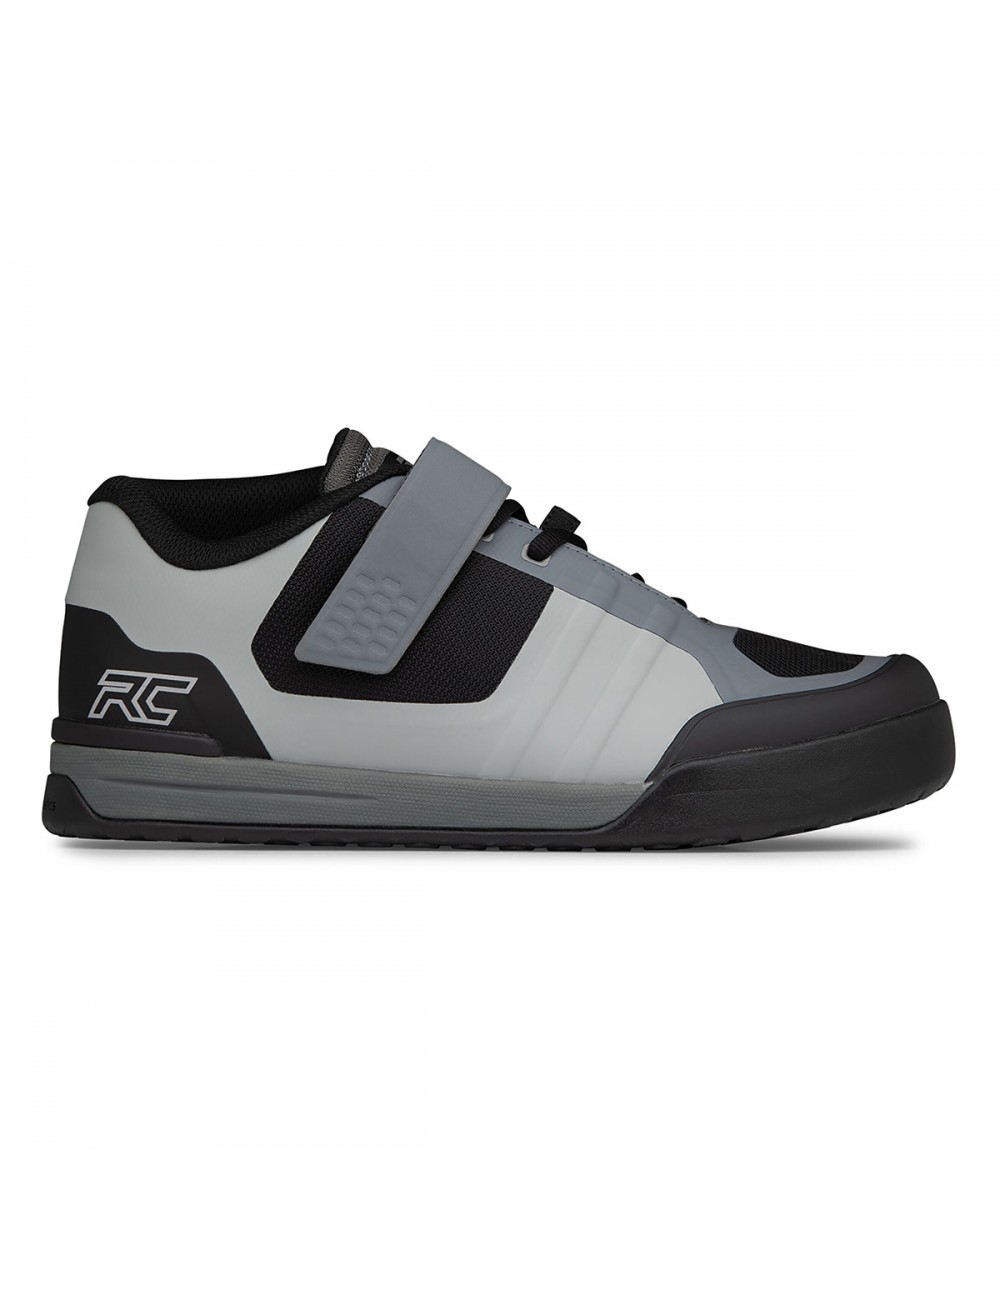 Ride Concepts Transition Clipless Shoe - Grey